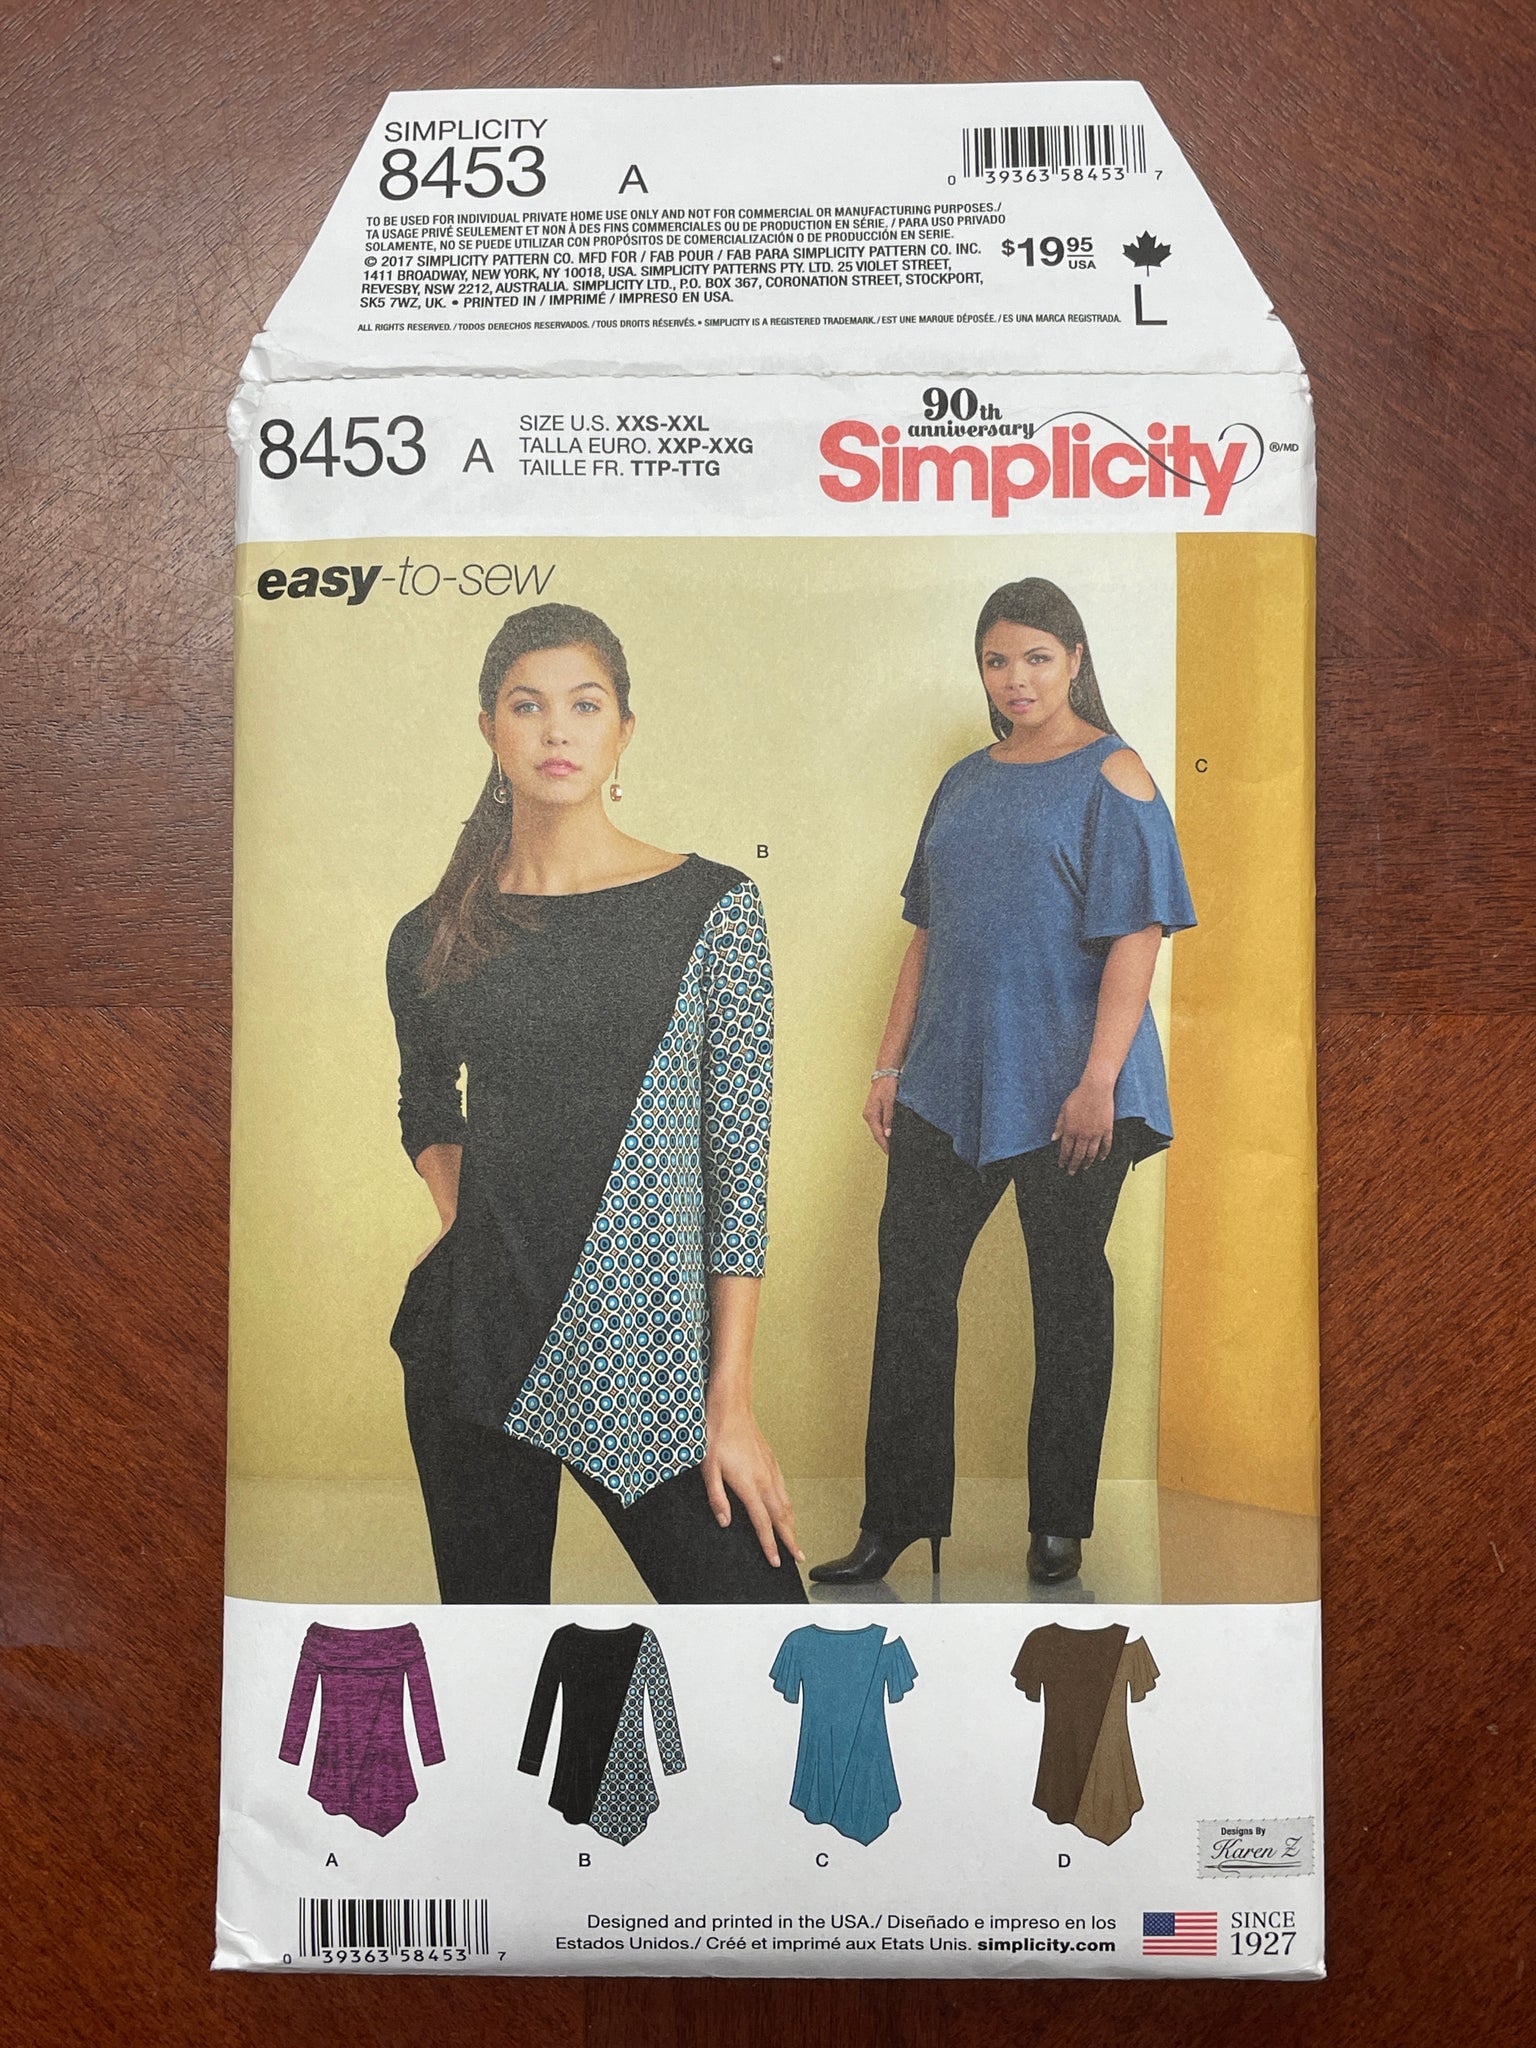 2017 Simplicity 8453 Pattern - Knit Tops FACTORY FOLDED